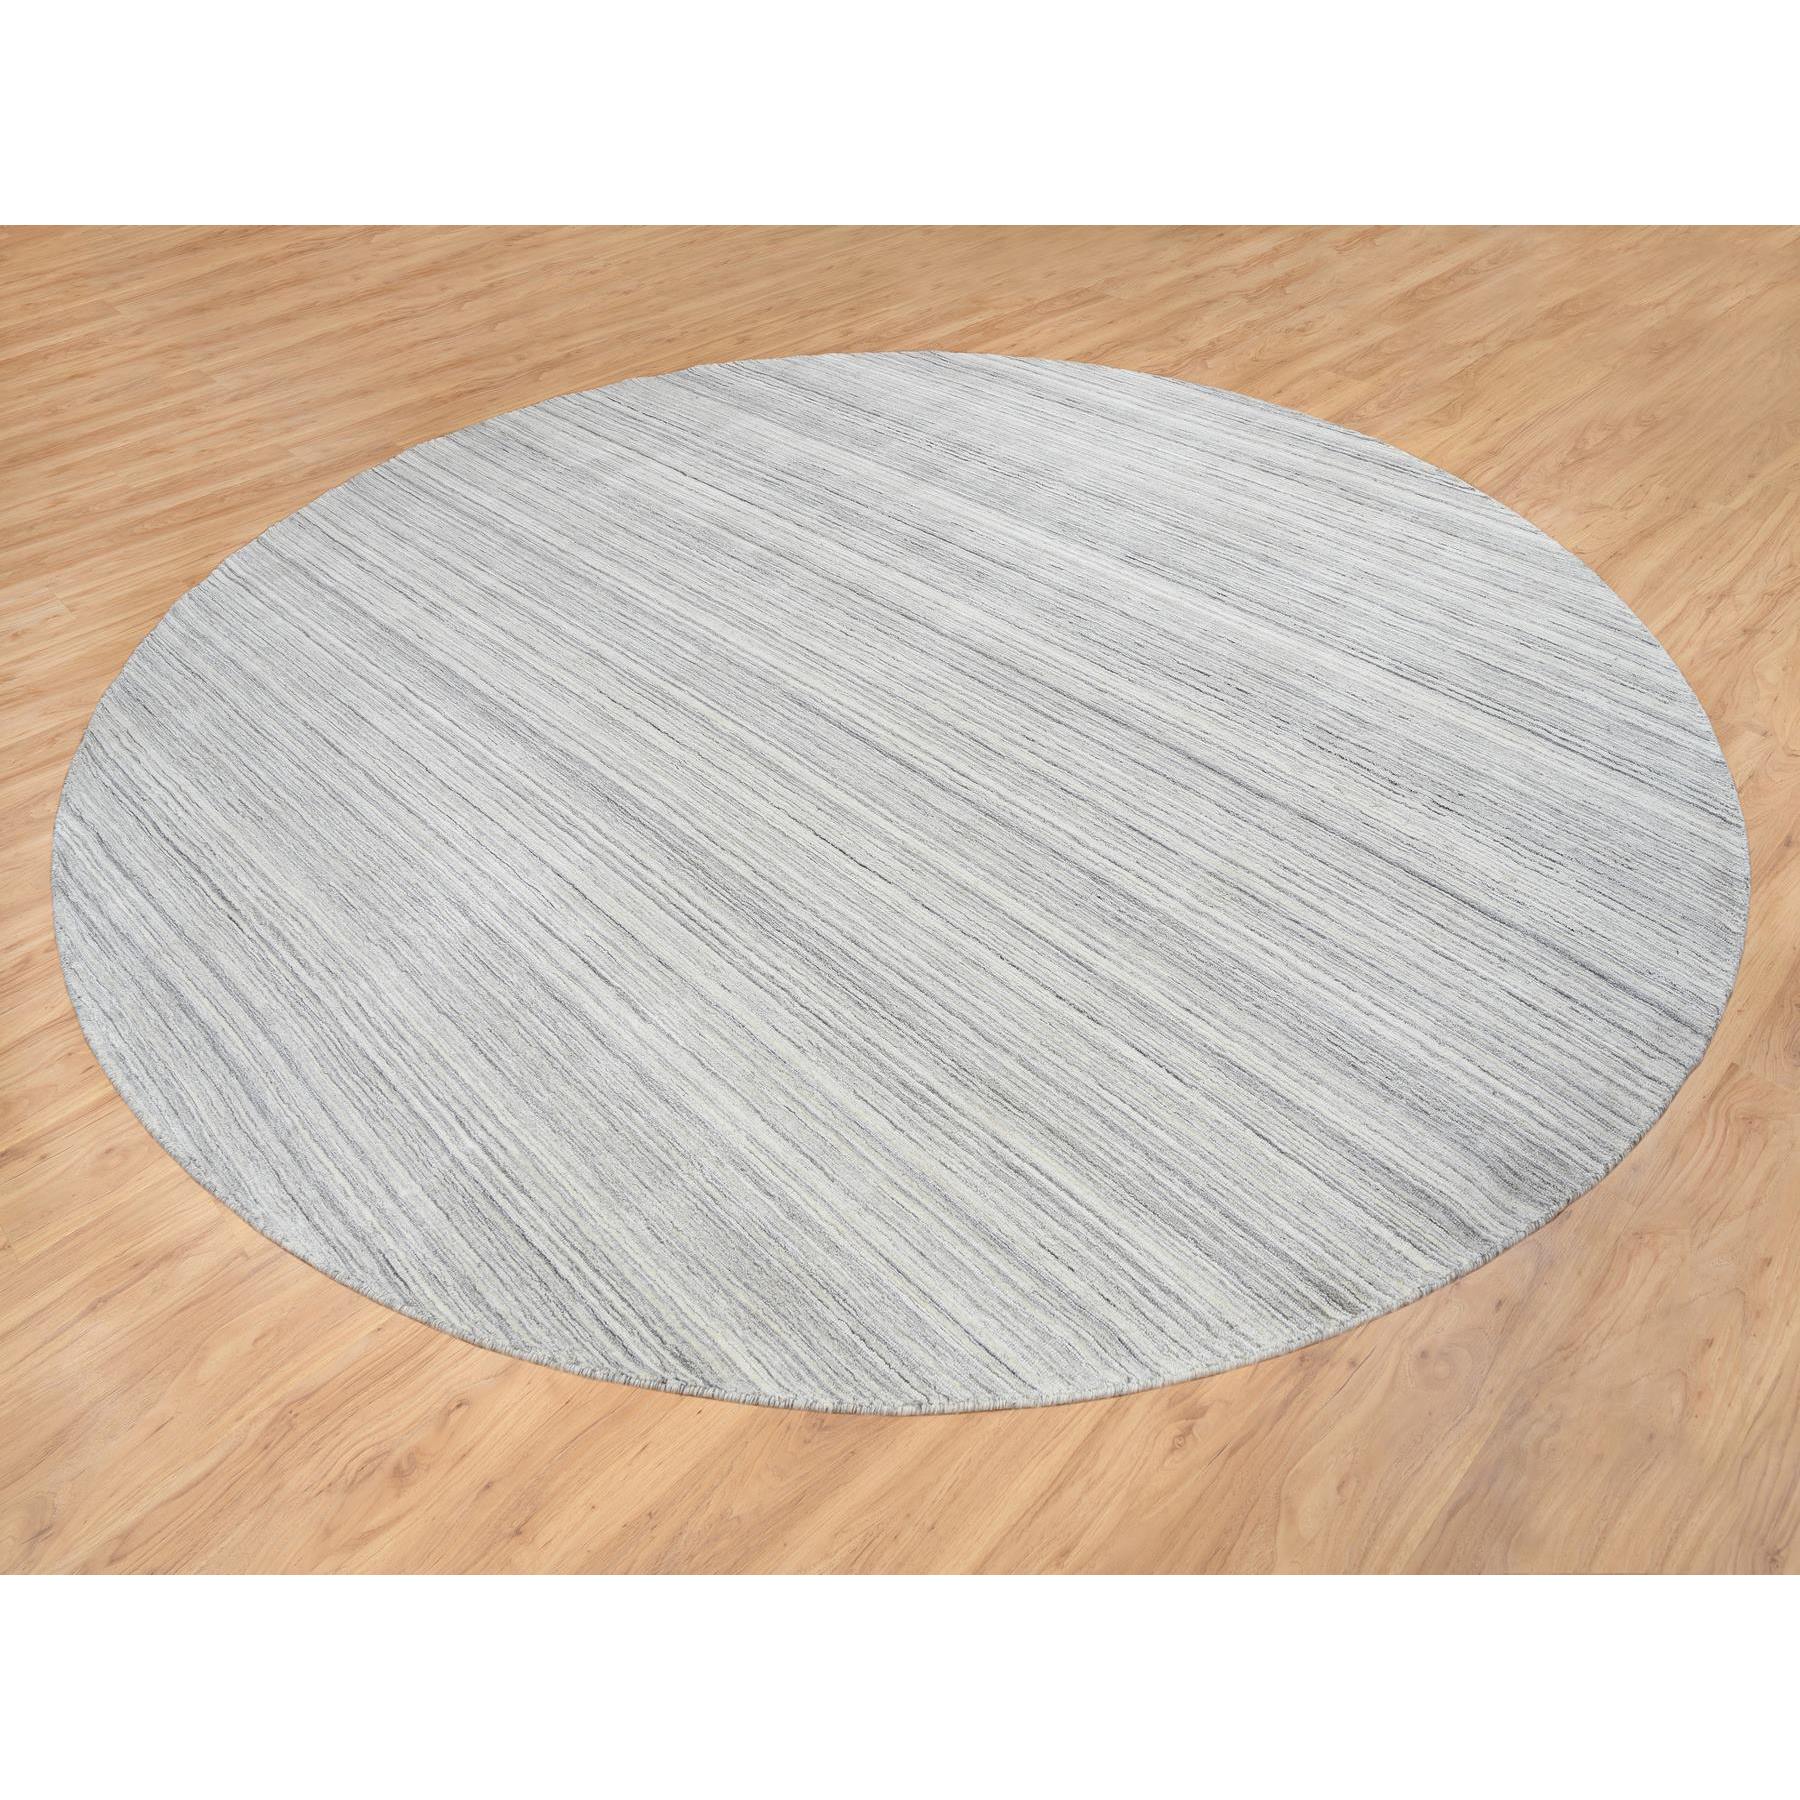 12'x12' Platinum Gray and Cream, Plain Hand Loomed Undyed Natural Wool, Modern Design Thick and Plush, Round Oriental Rug 